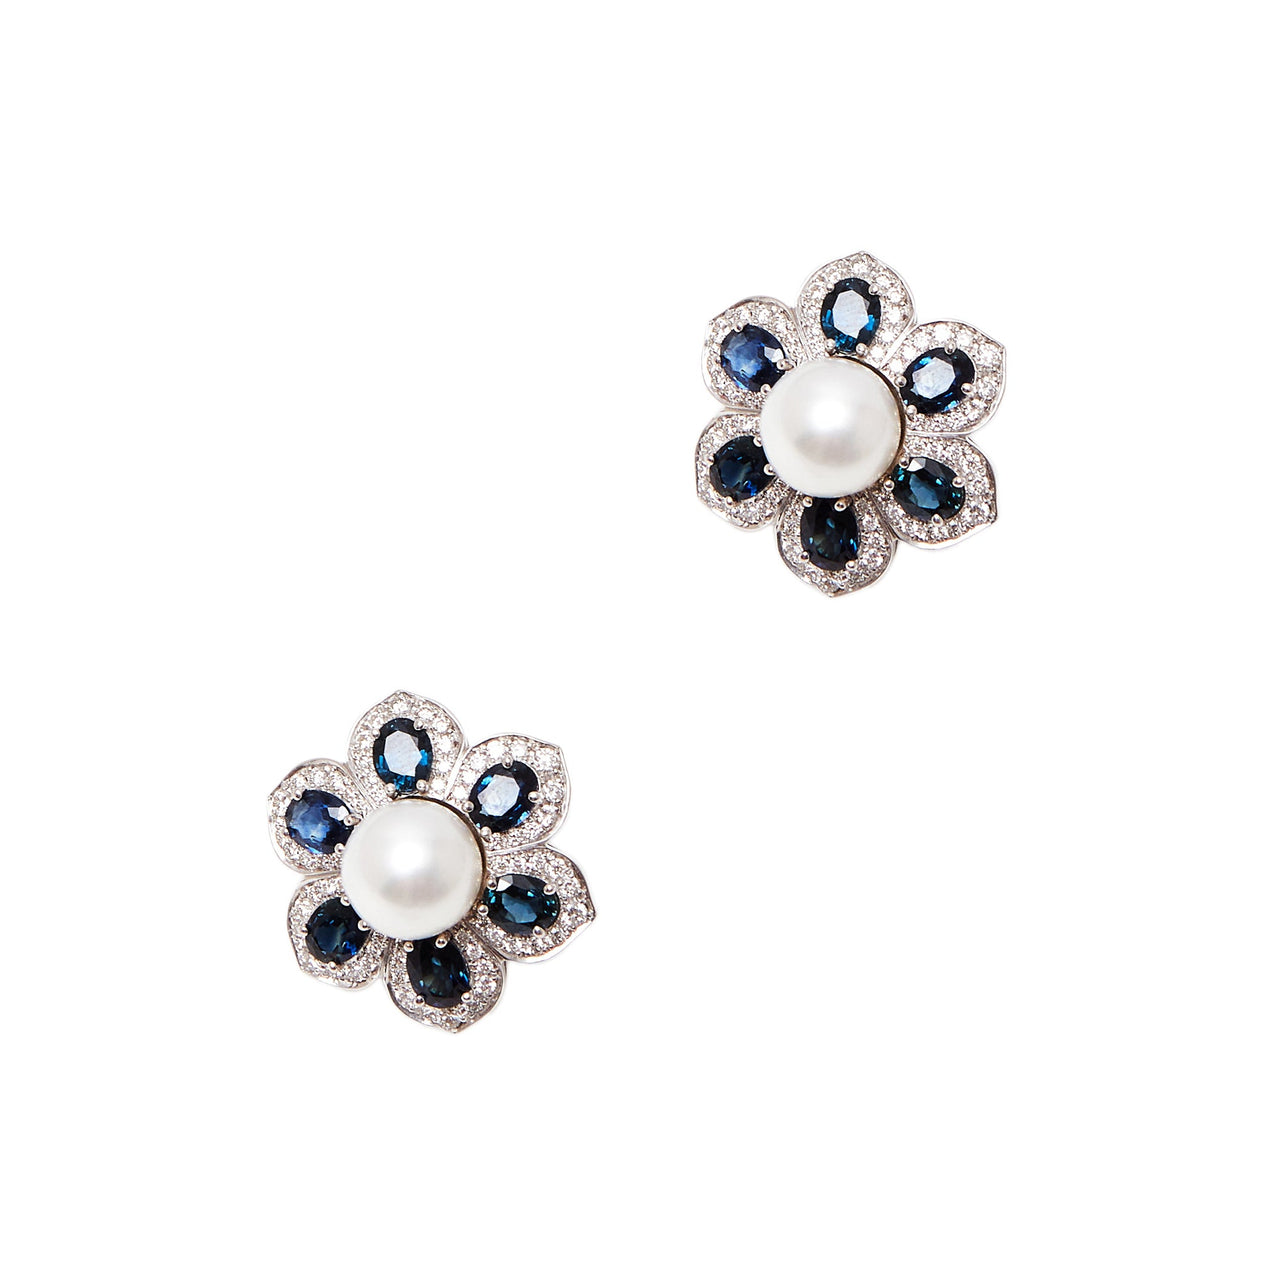 Pre-Owned White Gold Diamond Sapphire & Pearl Earrings